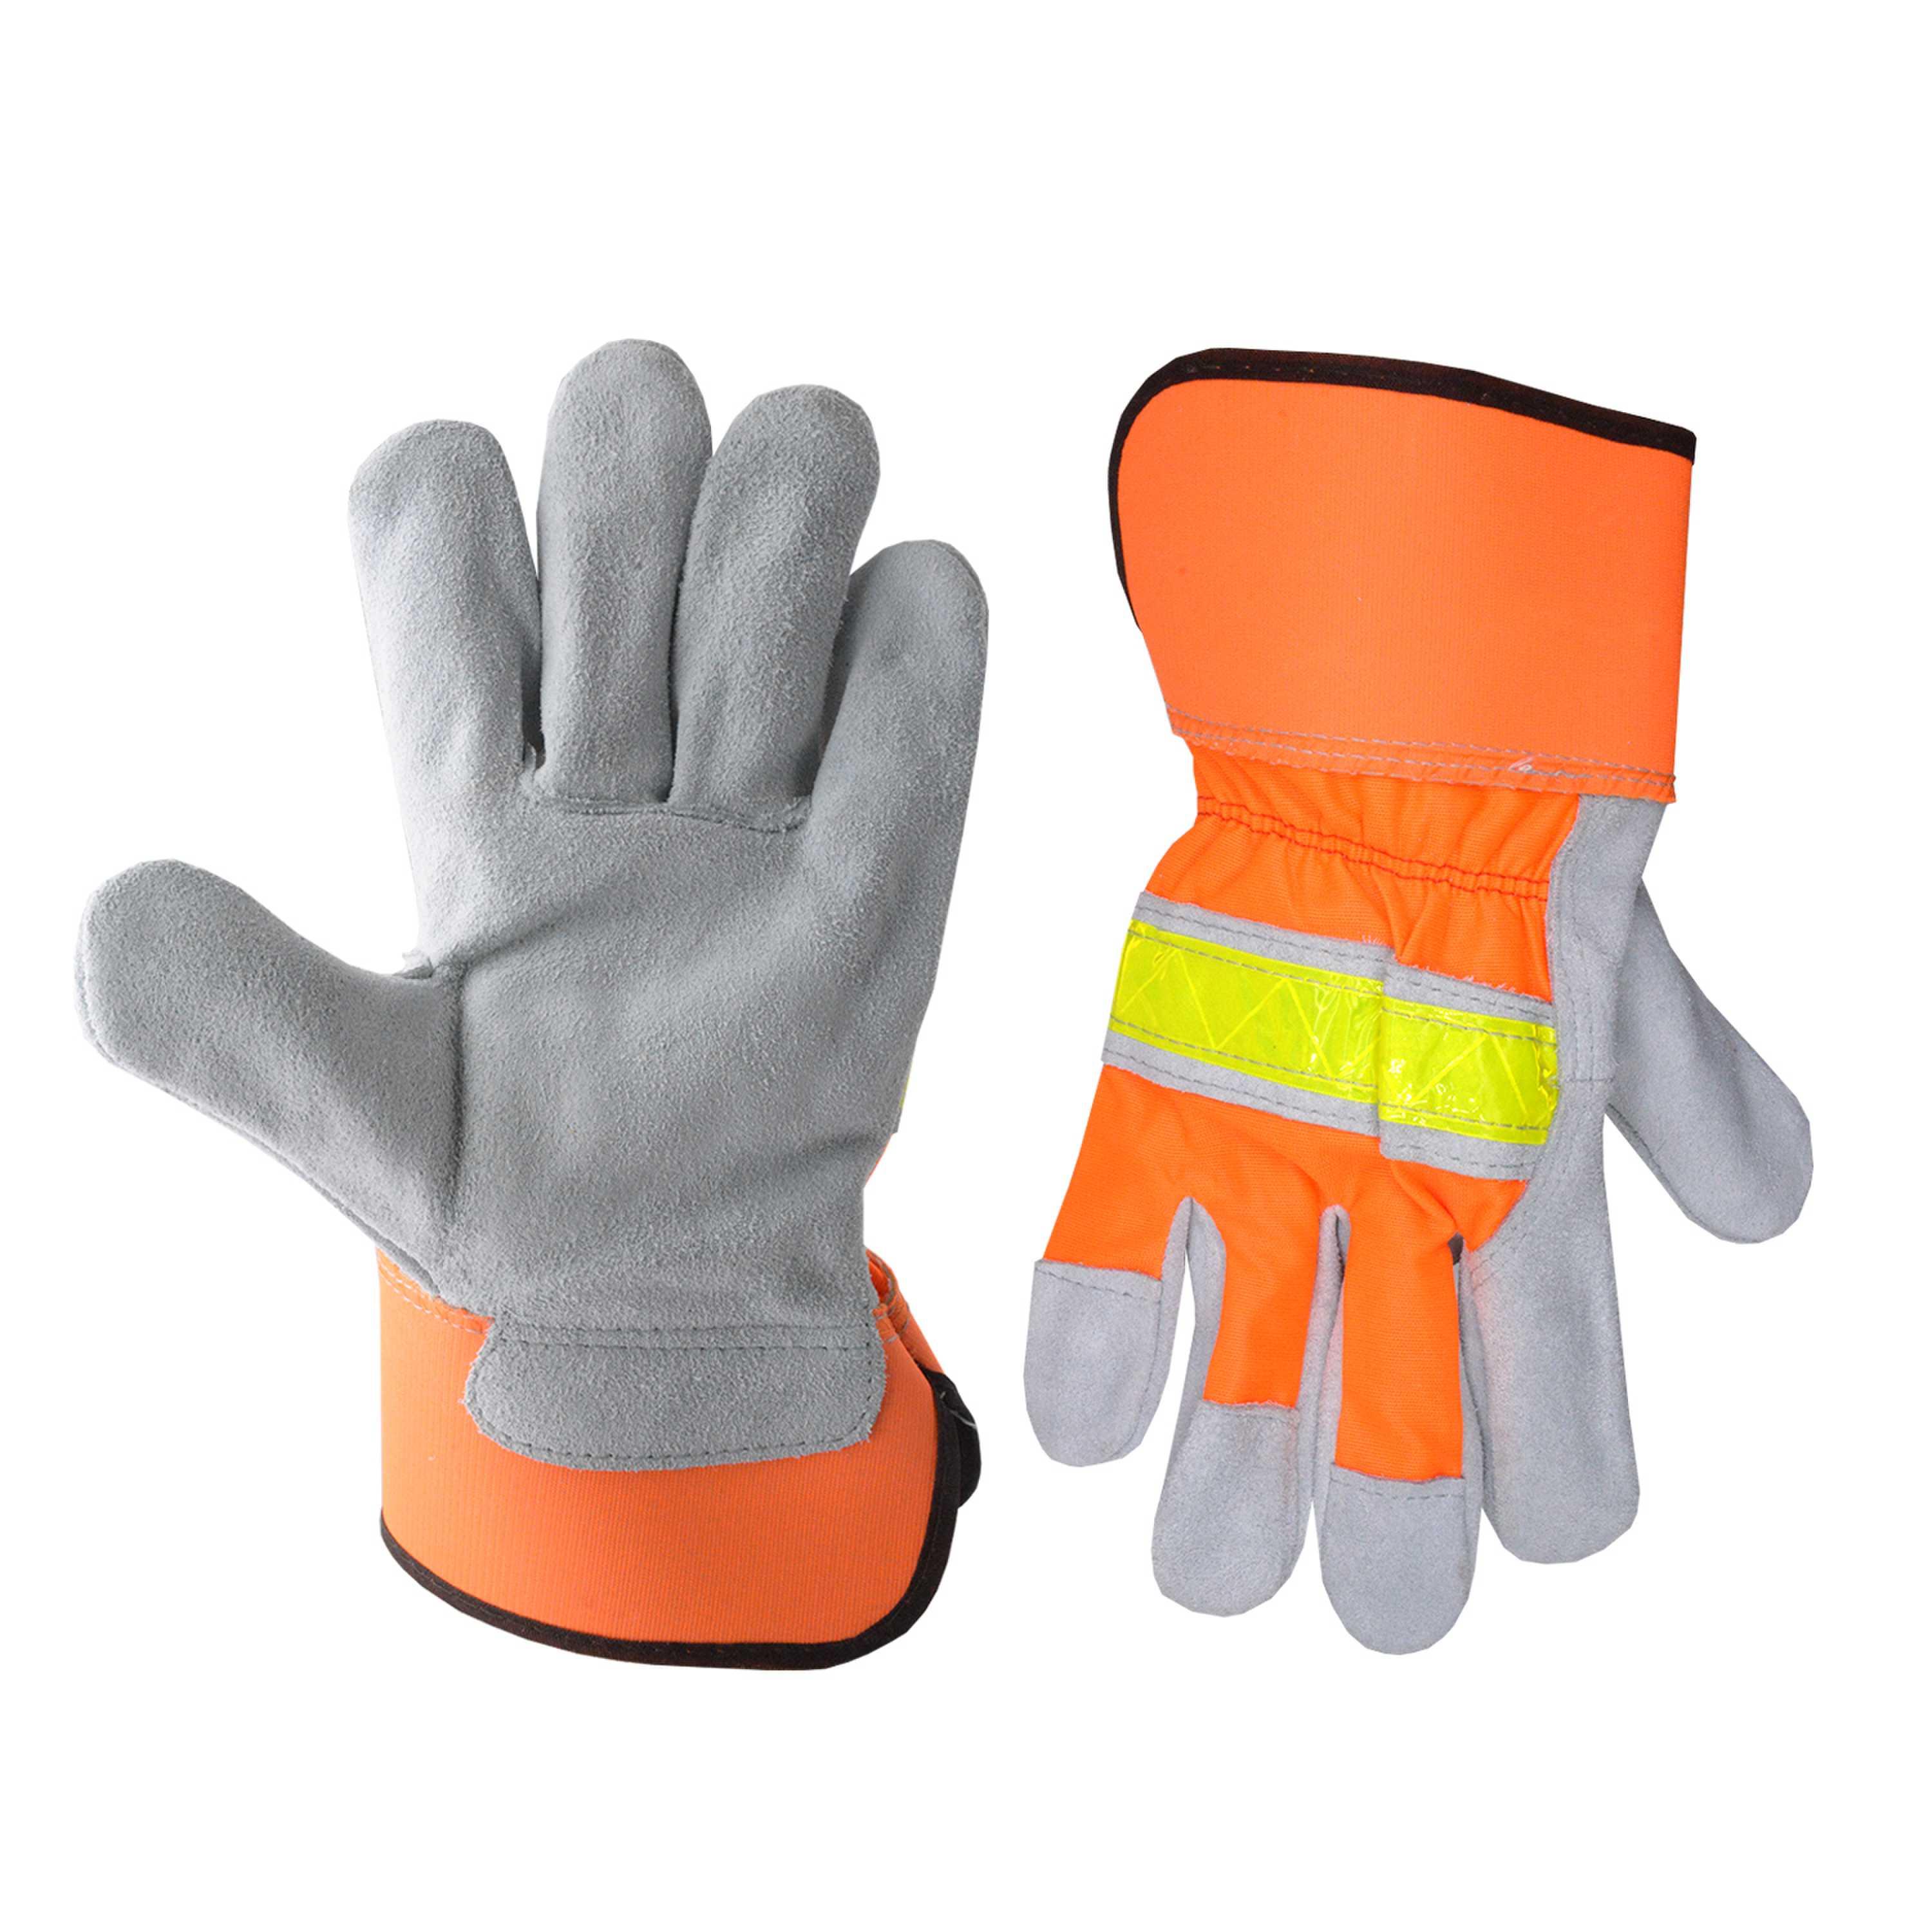 749 PRISAFETY Cowhide Leather Palm Truck Driving Warehouse Gardening Farm Leather Work Gloves